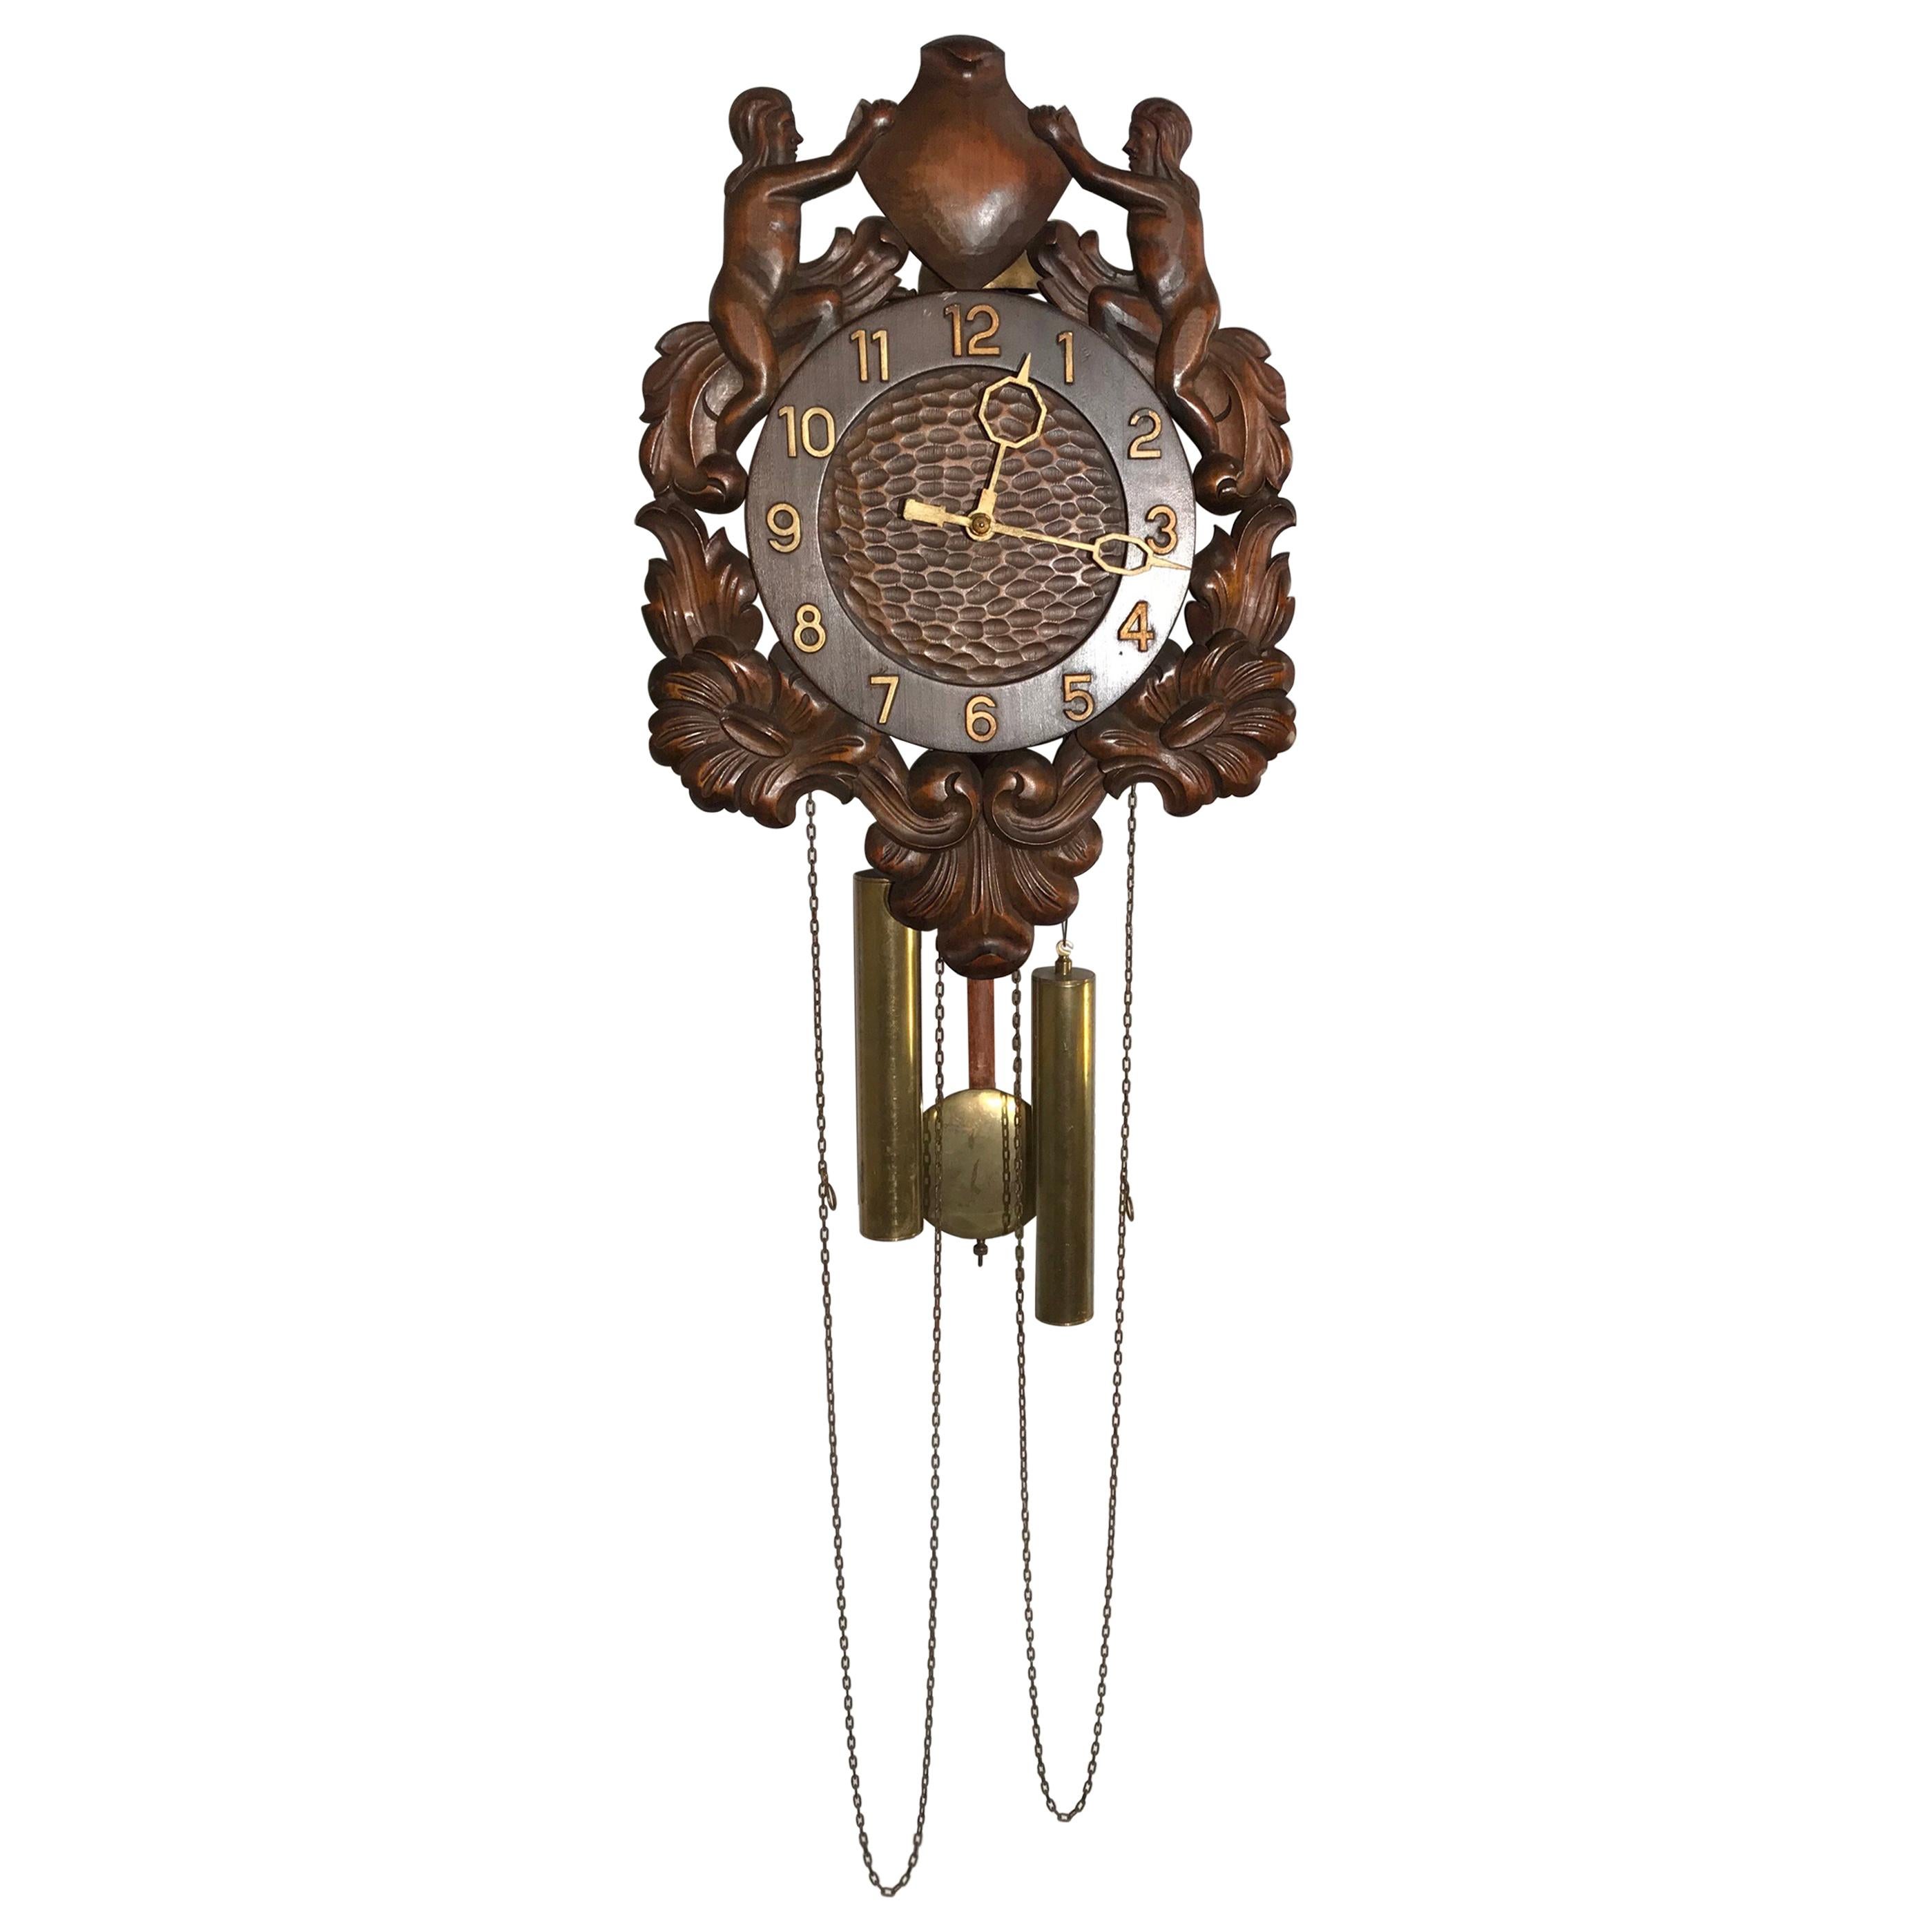 Unique Denmark Made Classical Roman Wall Clock with Sculptures and Flowers For Sale